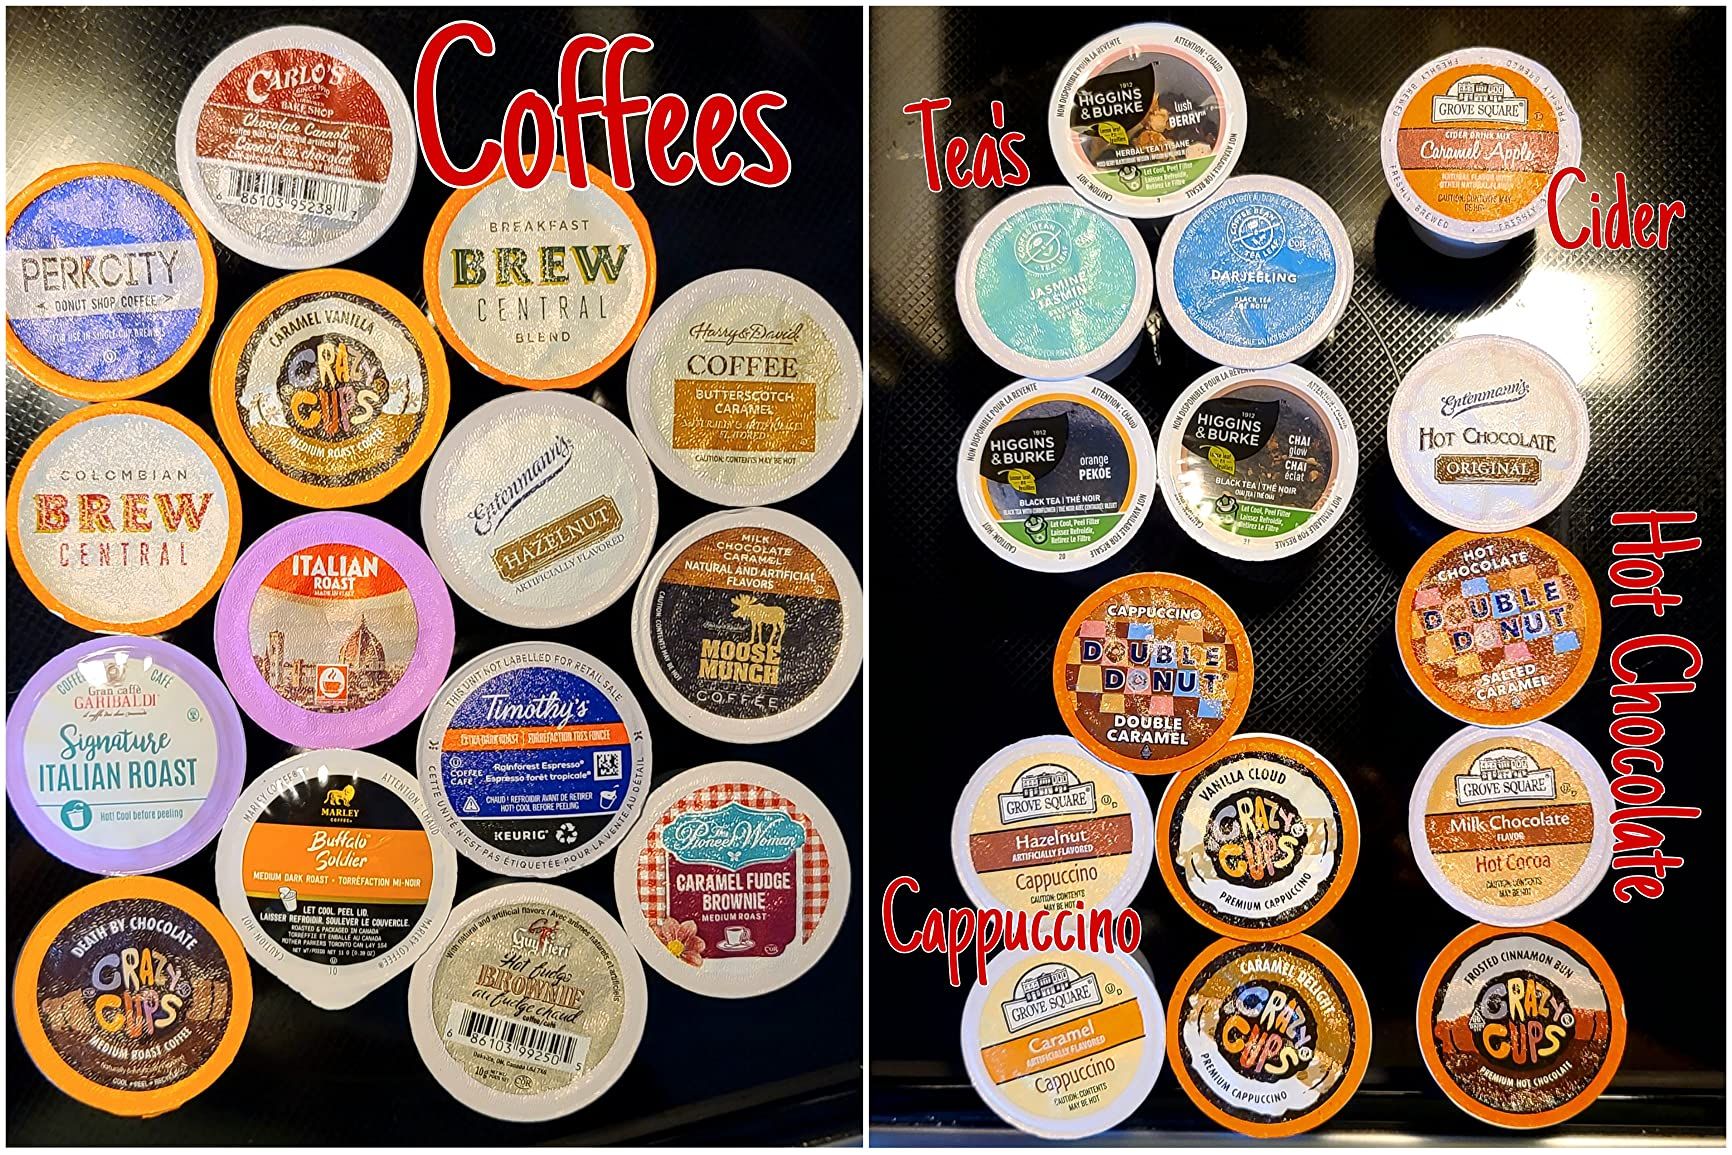 Crazy Cups Flavored Coffee Pods Variety Pack for Keurig K Cups Brewers, Assorted Flavored Coffee ... | Amazon (US)